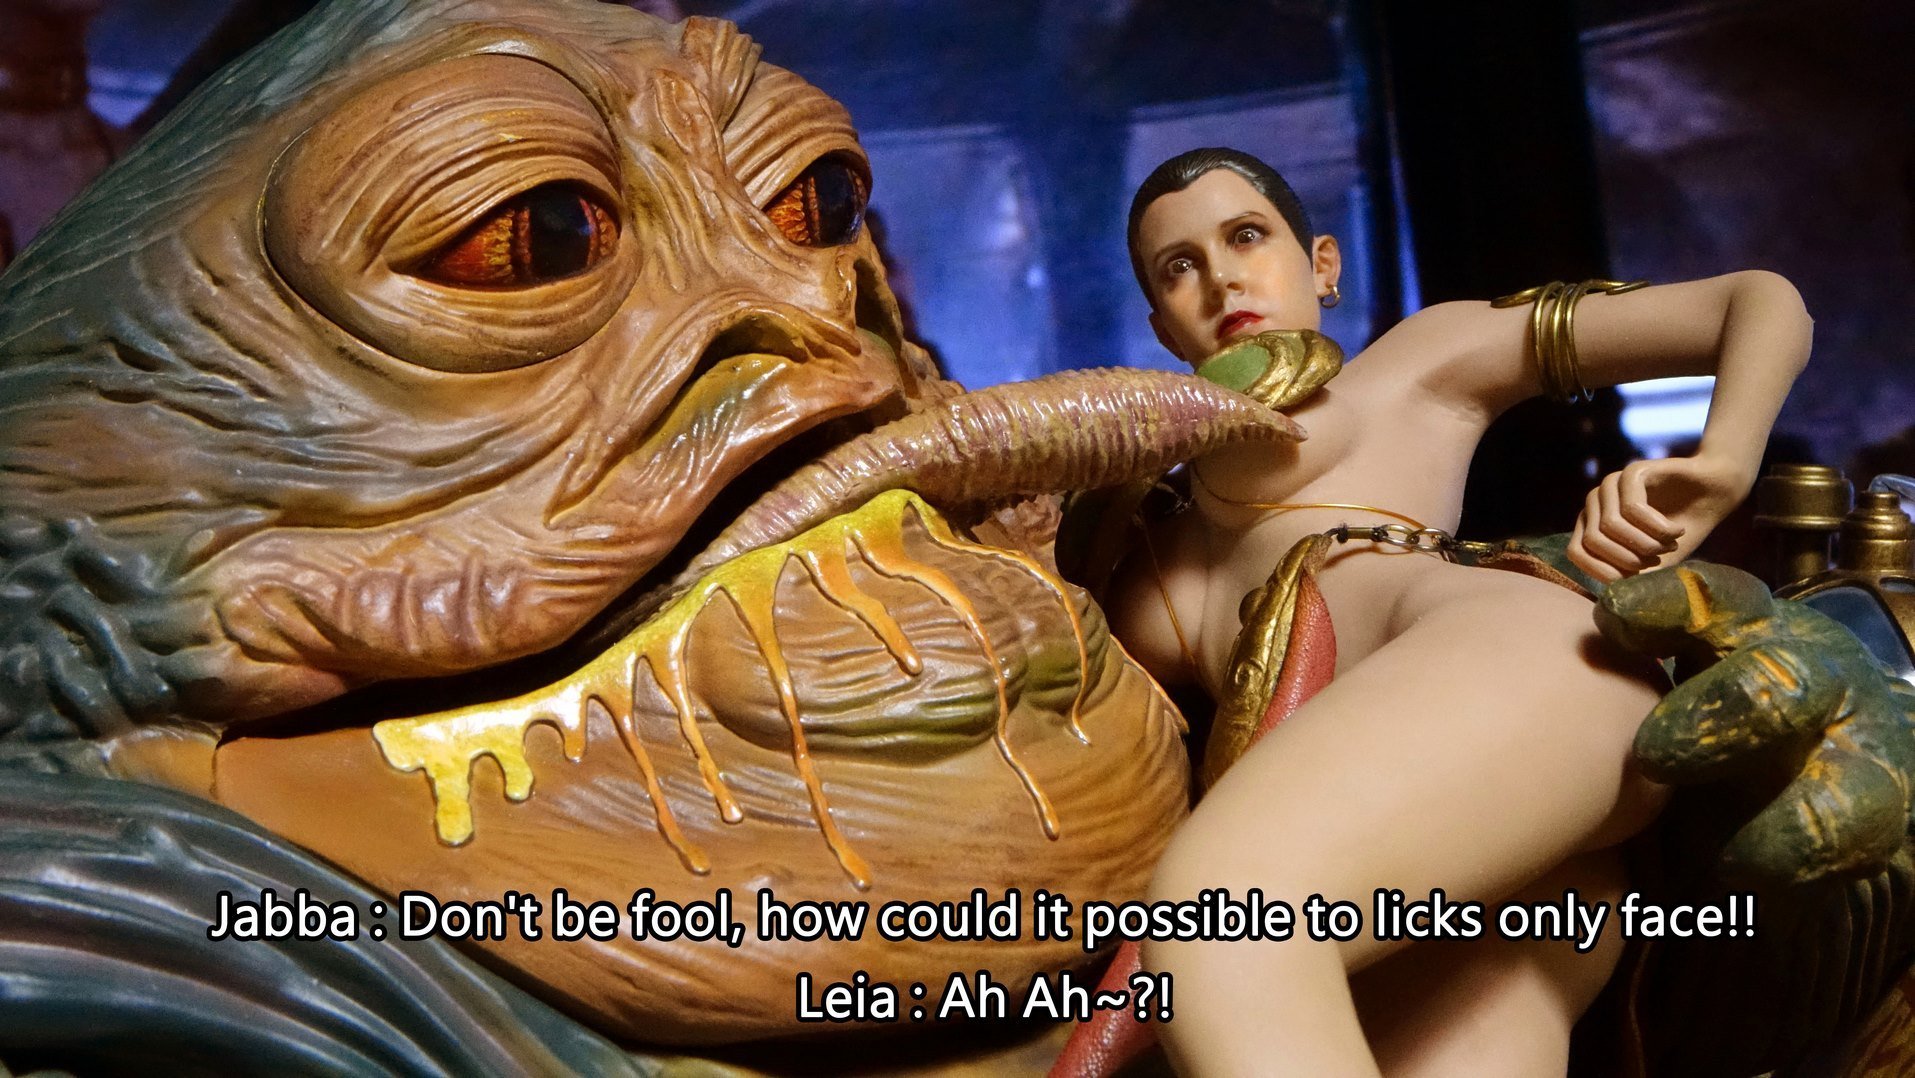 Leia's Final Fight - A Vore Animation.